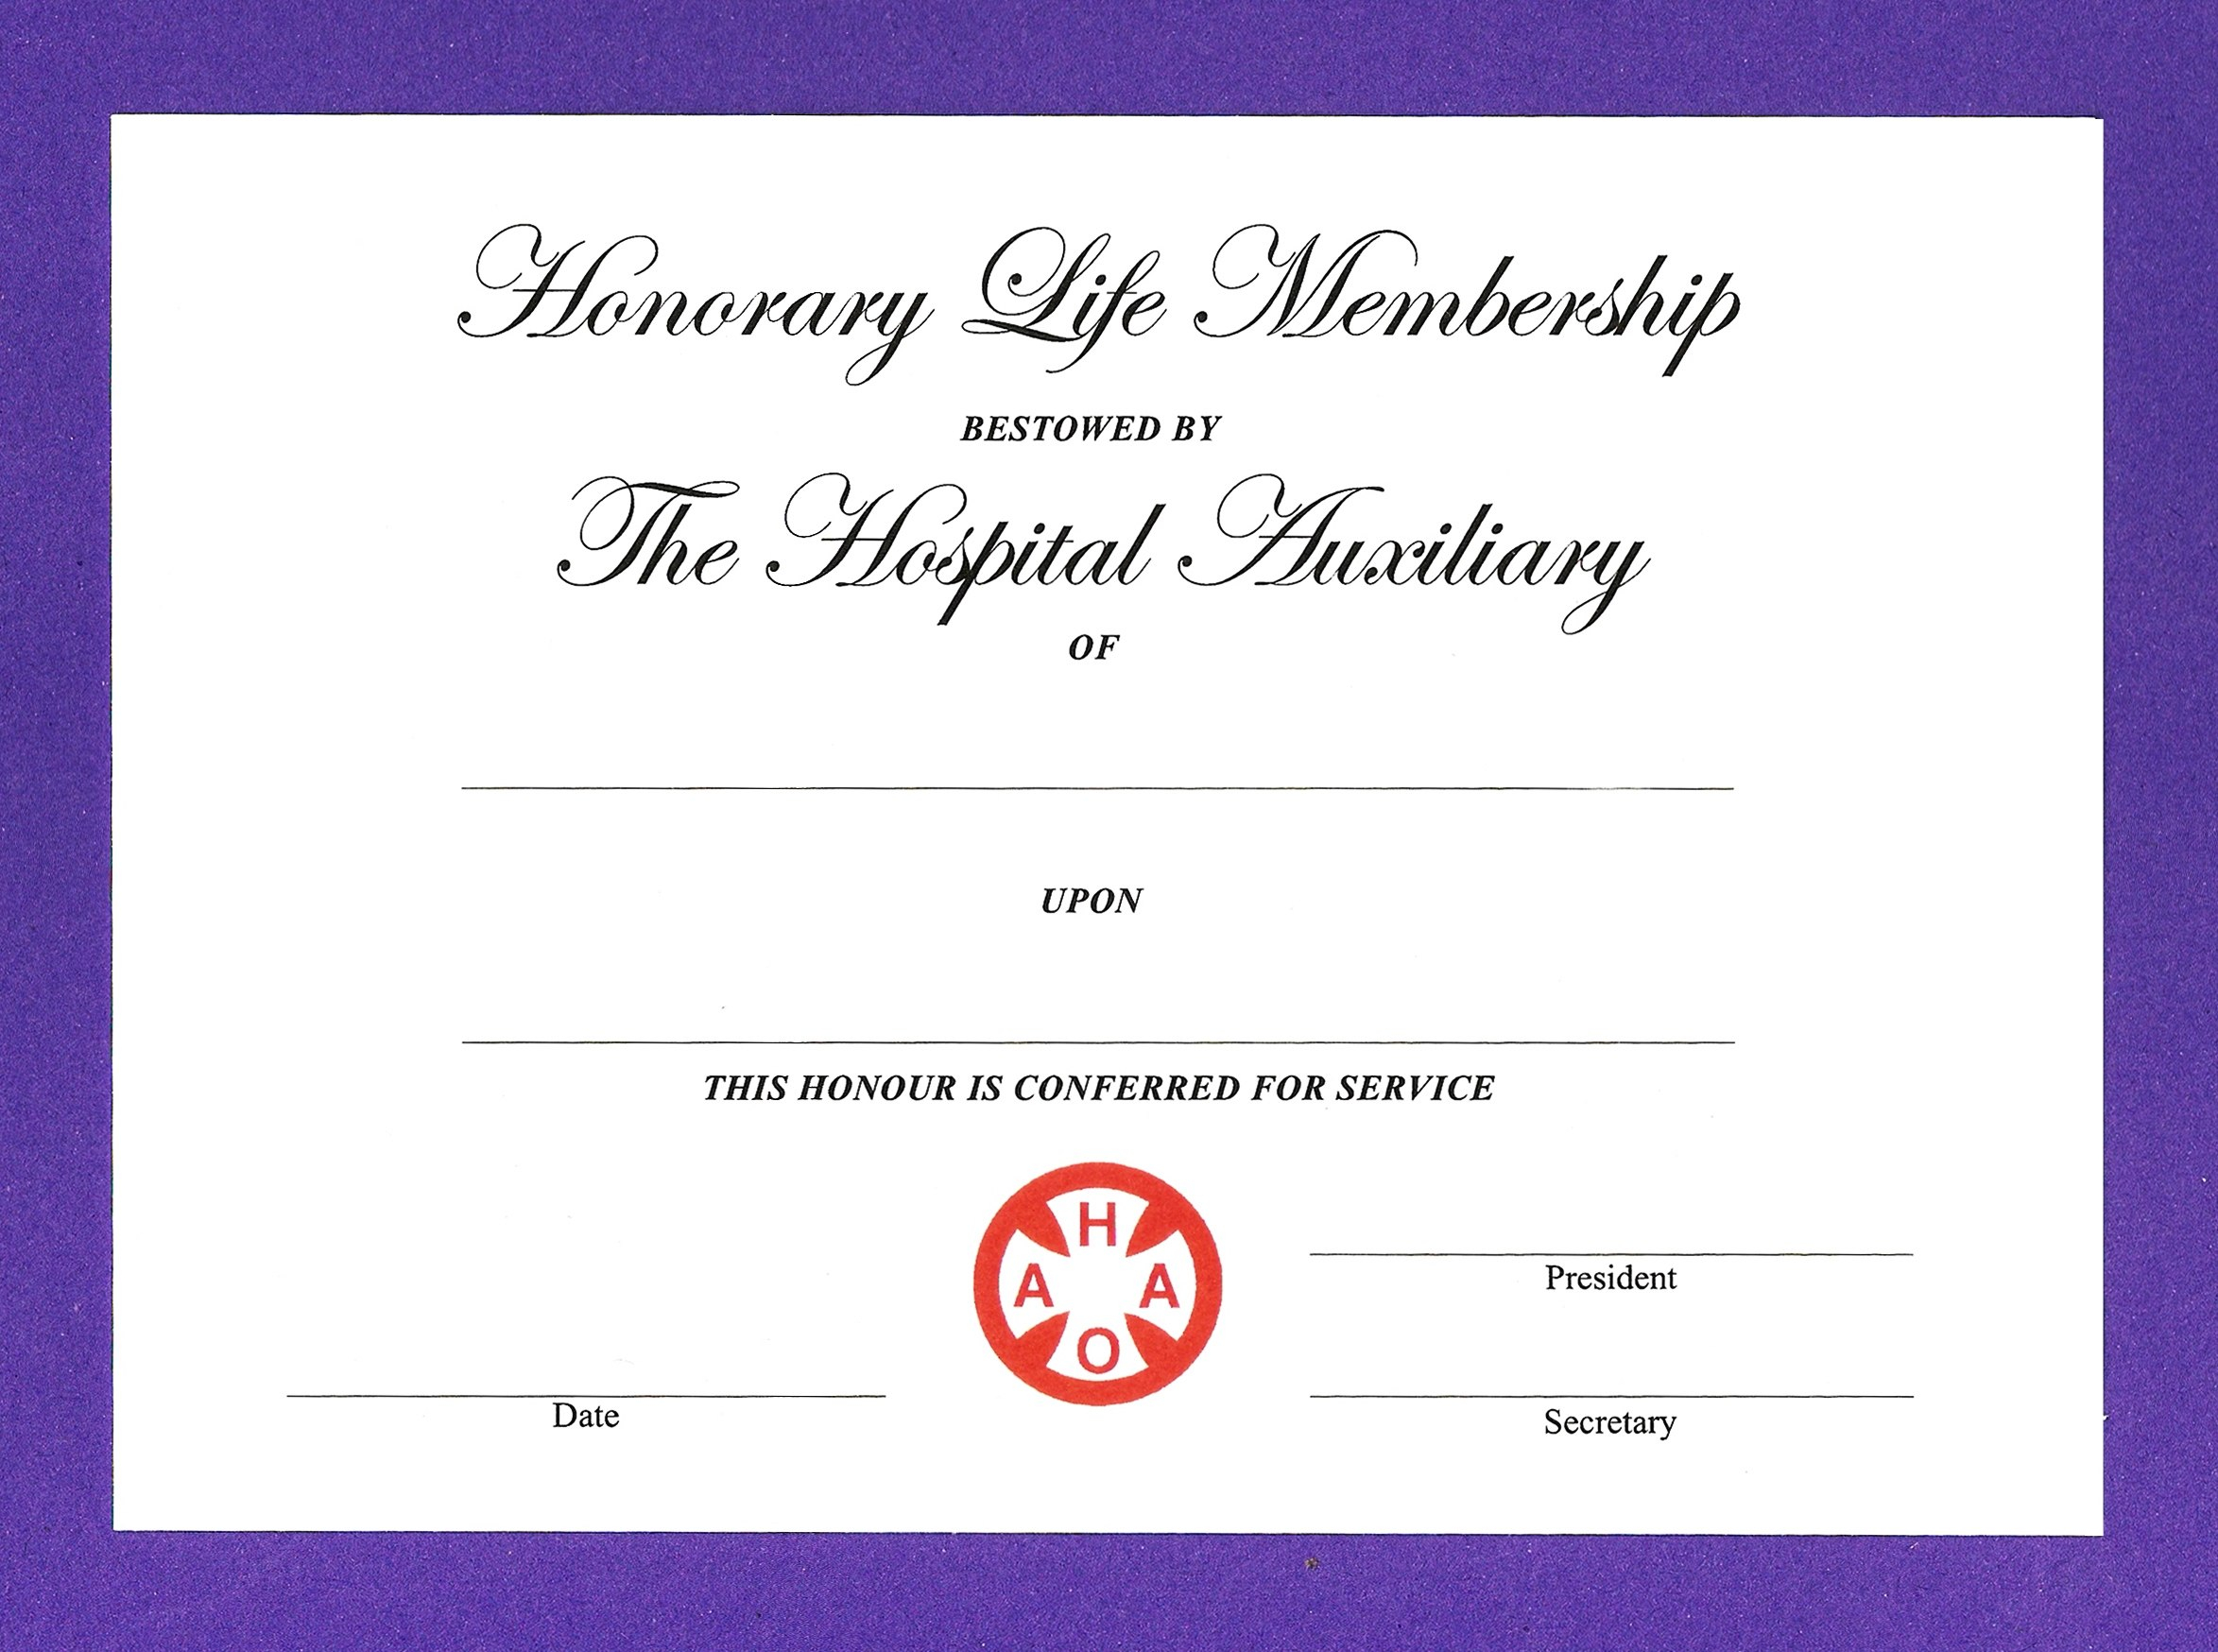 Honorary Life Certificate Templates  Pdf Docx  Free  Premium intended for Life Membership Certificate Templates